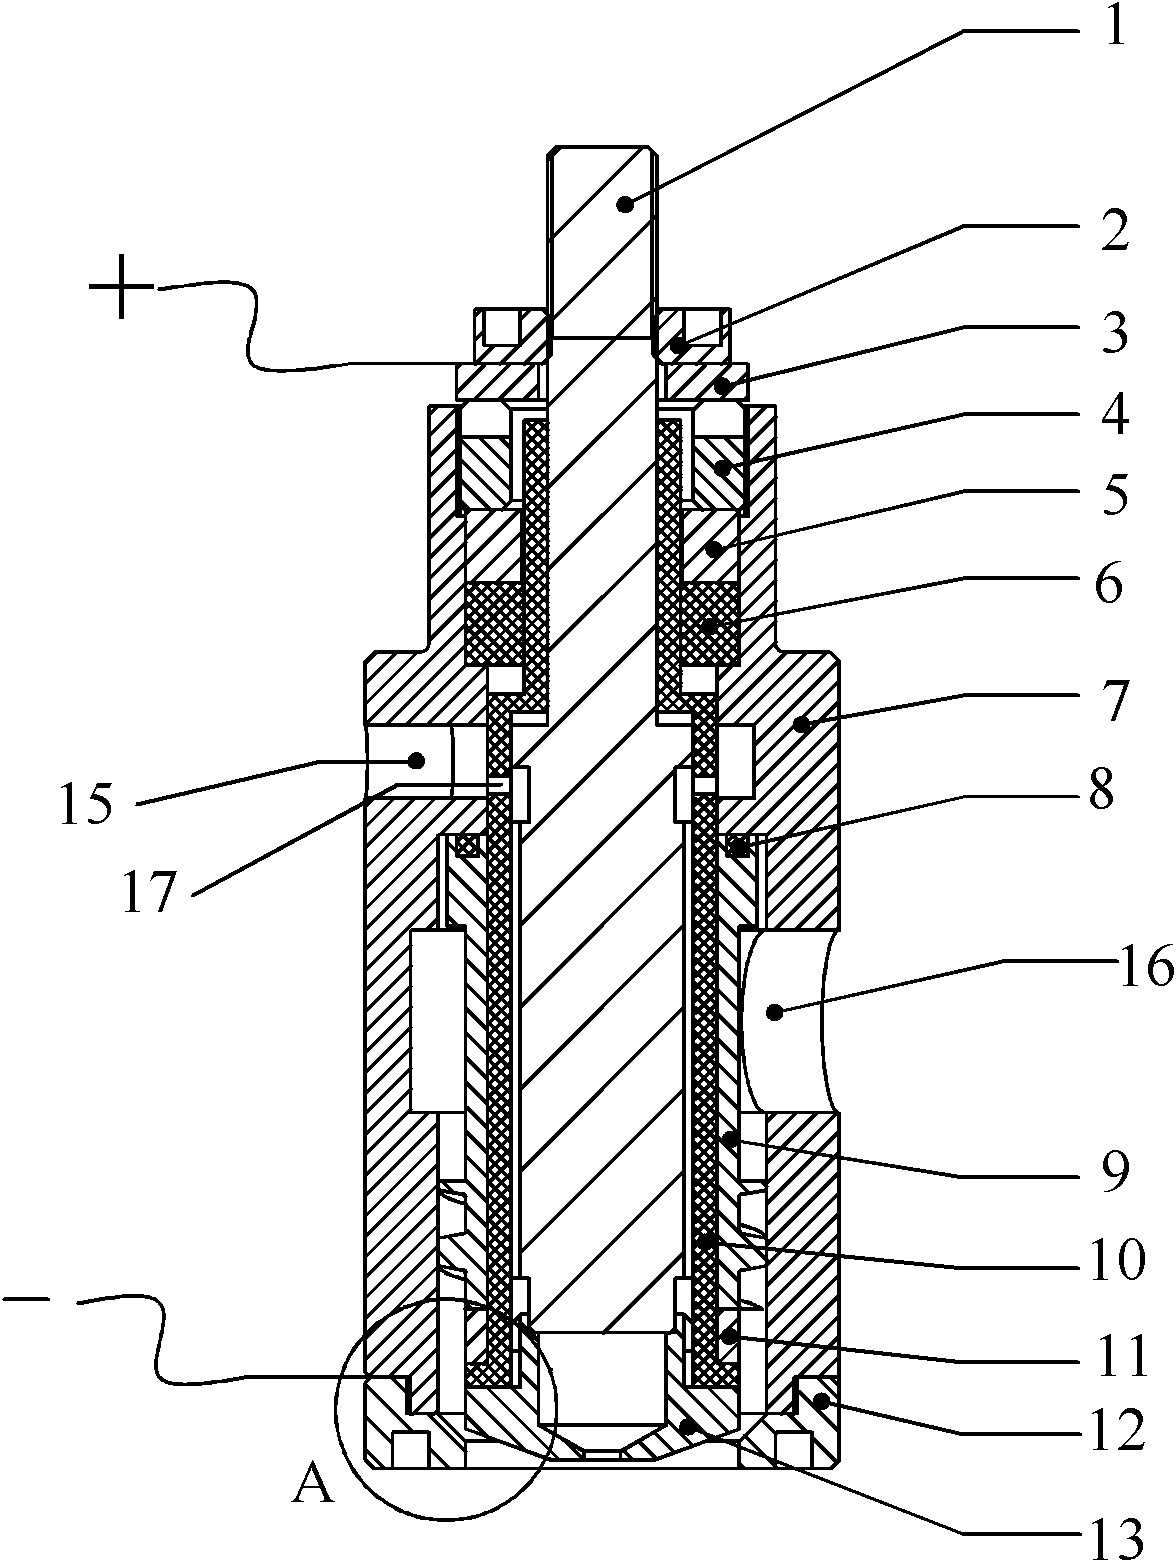 Head injector of low-thrust engine for electric discharge and ignition by utilizing nozzle clearance